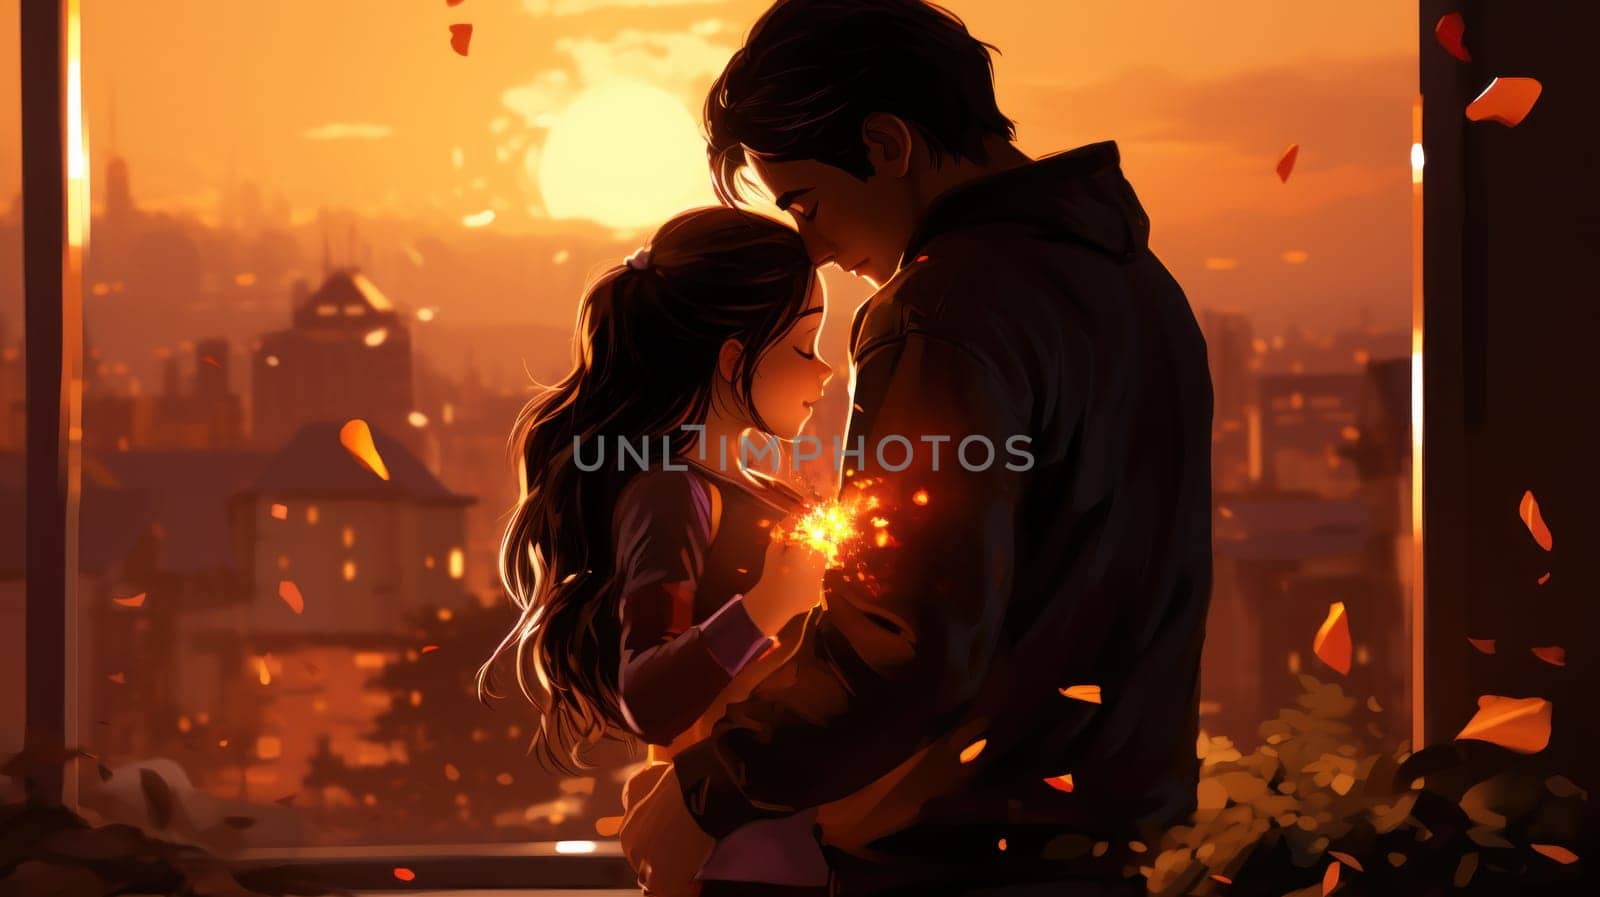 A man and woman hugging each other in front of a city